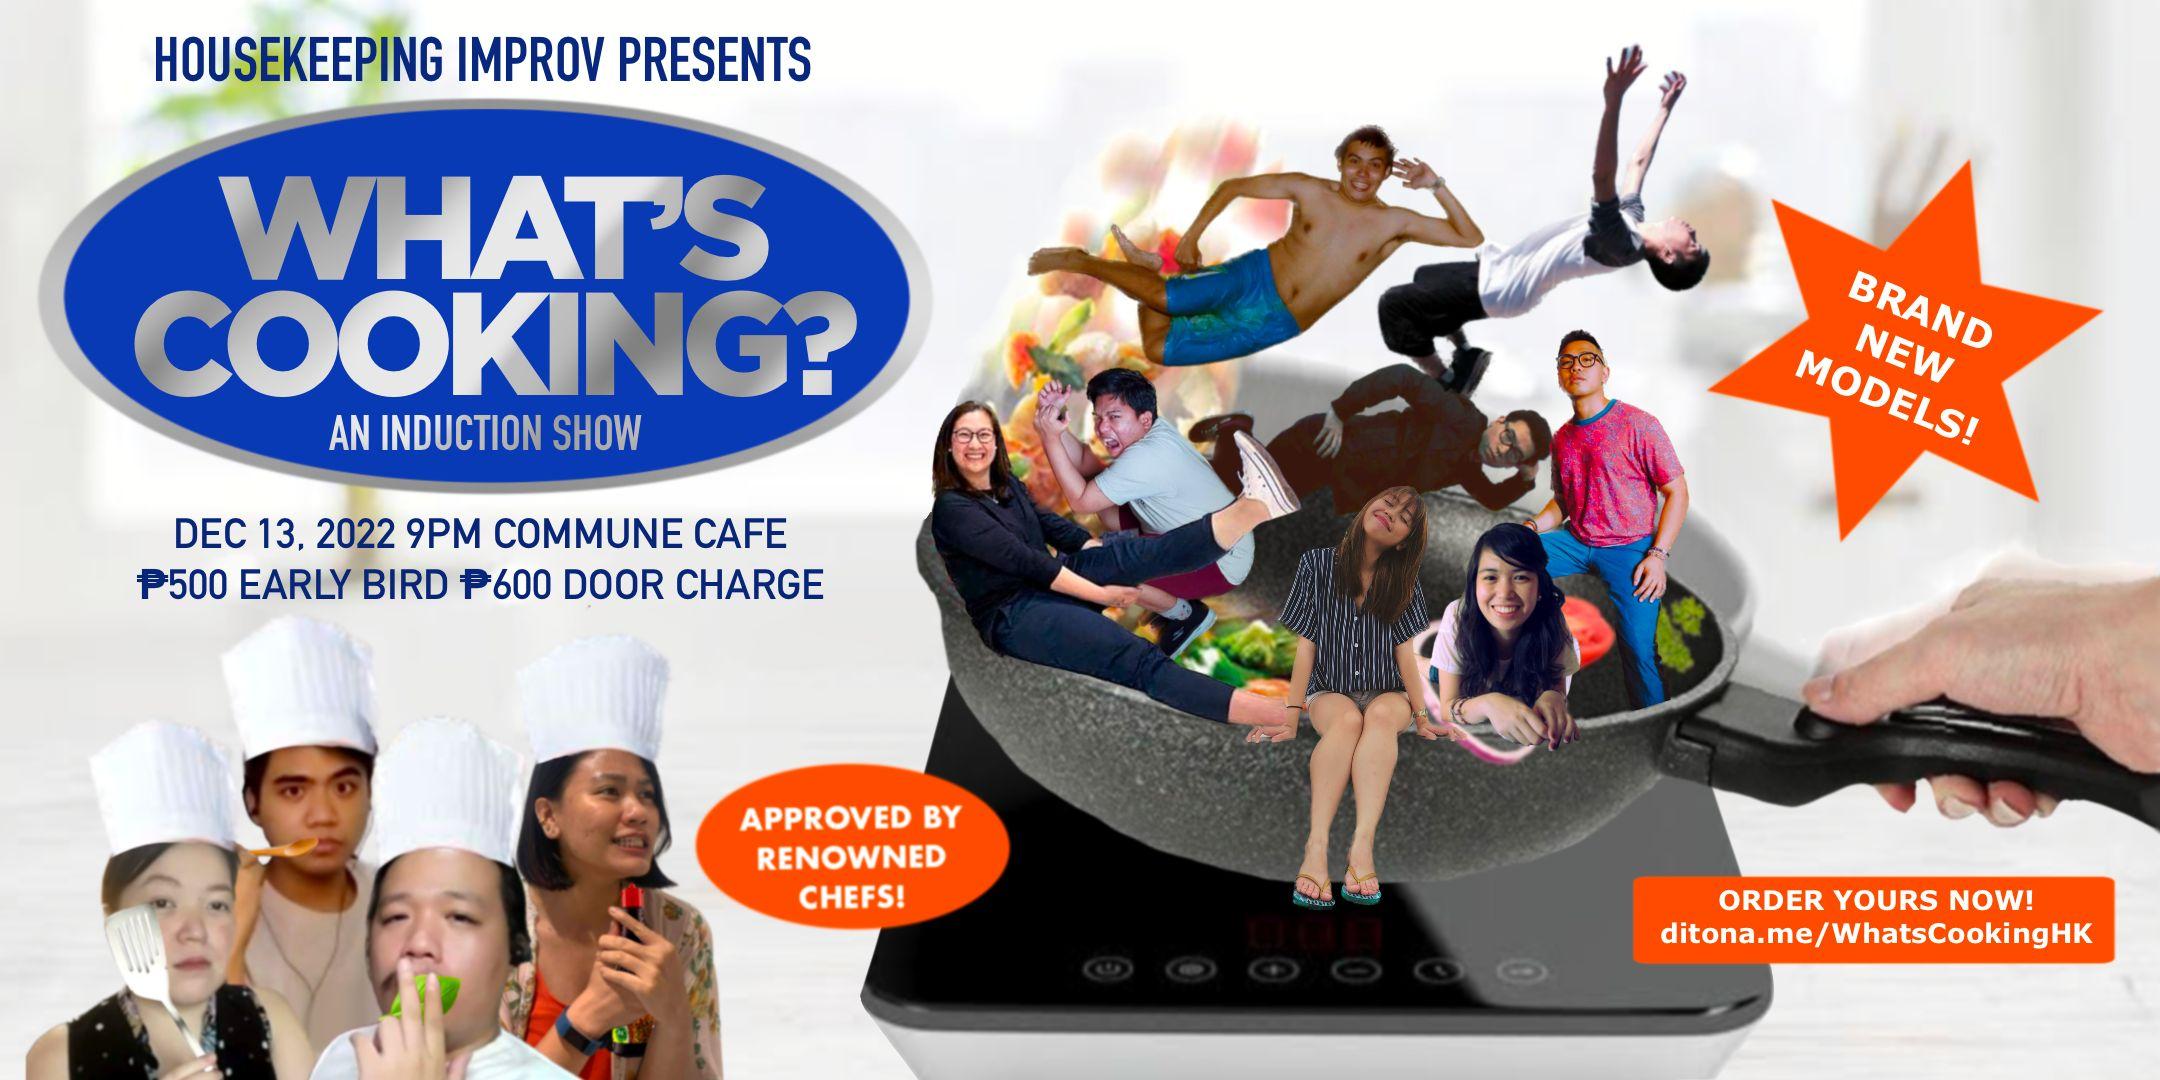 What's Cooking? An Induction Show Poster